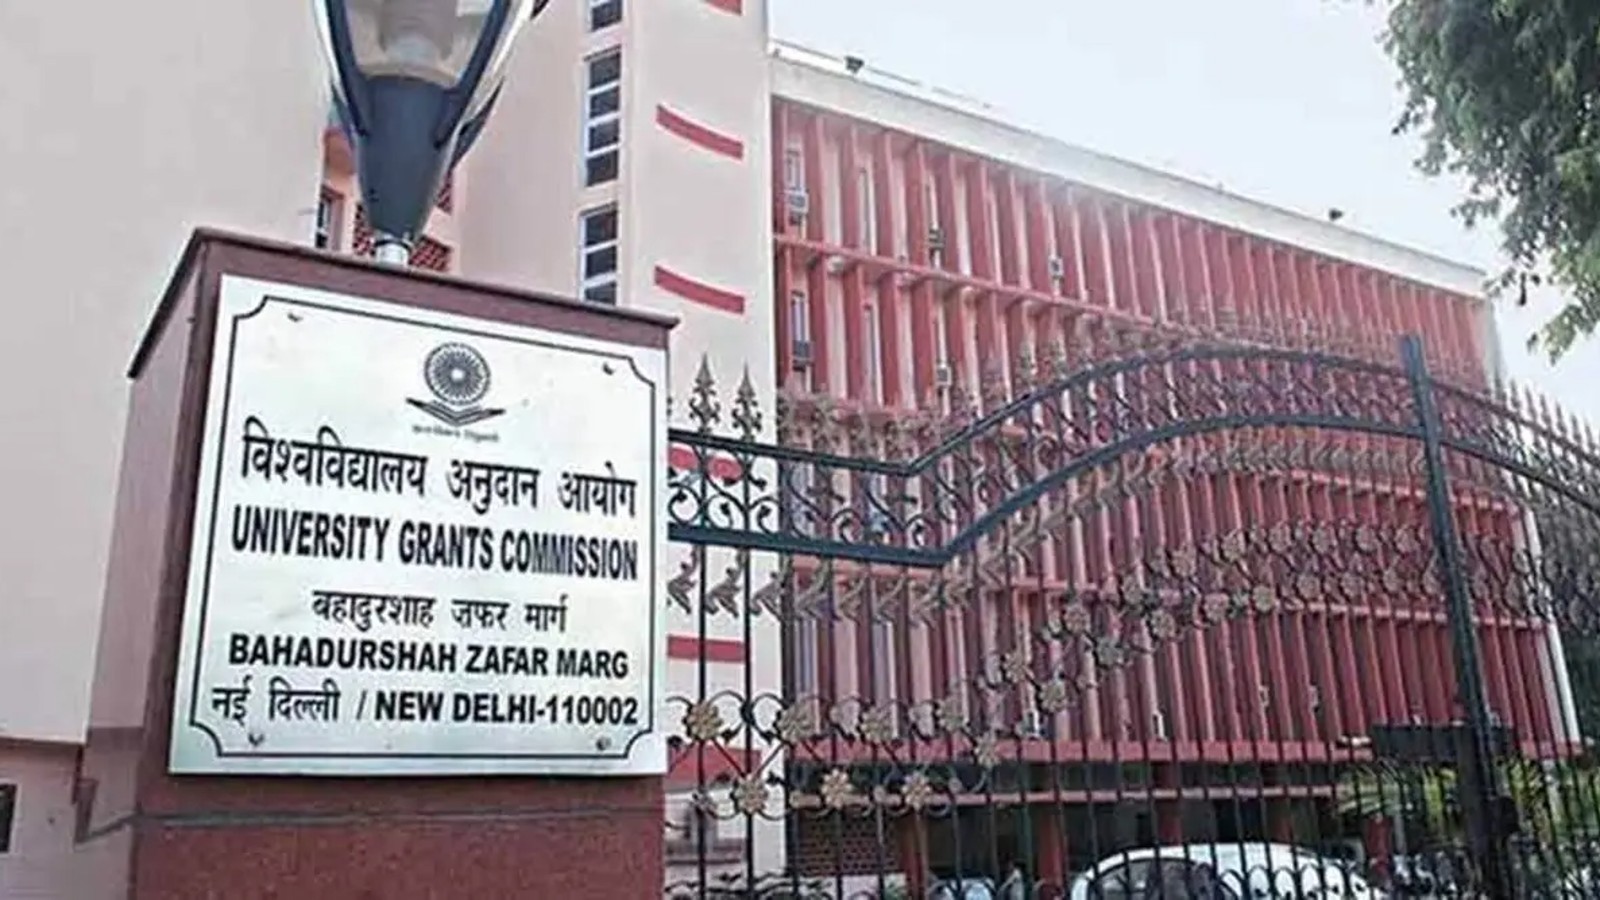 UGC pulls up defaulting varsities failed to appoint ombudsperson; list  includes Jadavpur University, Anna University | Education News - The Indian  Express